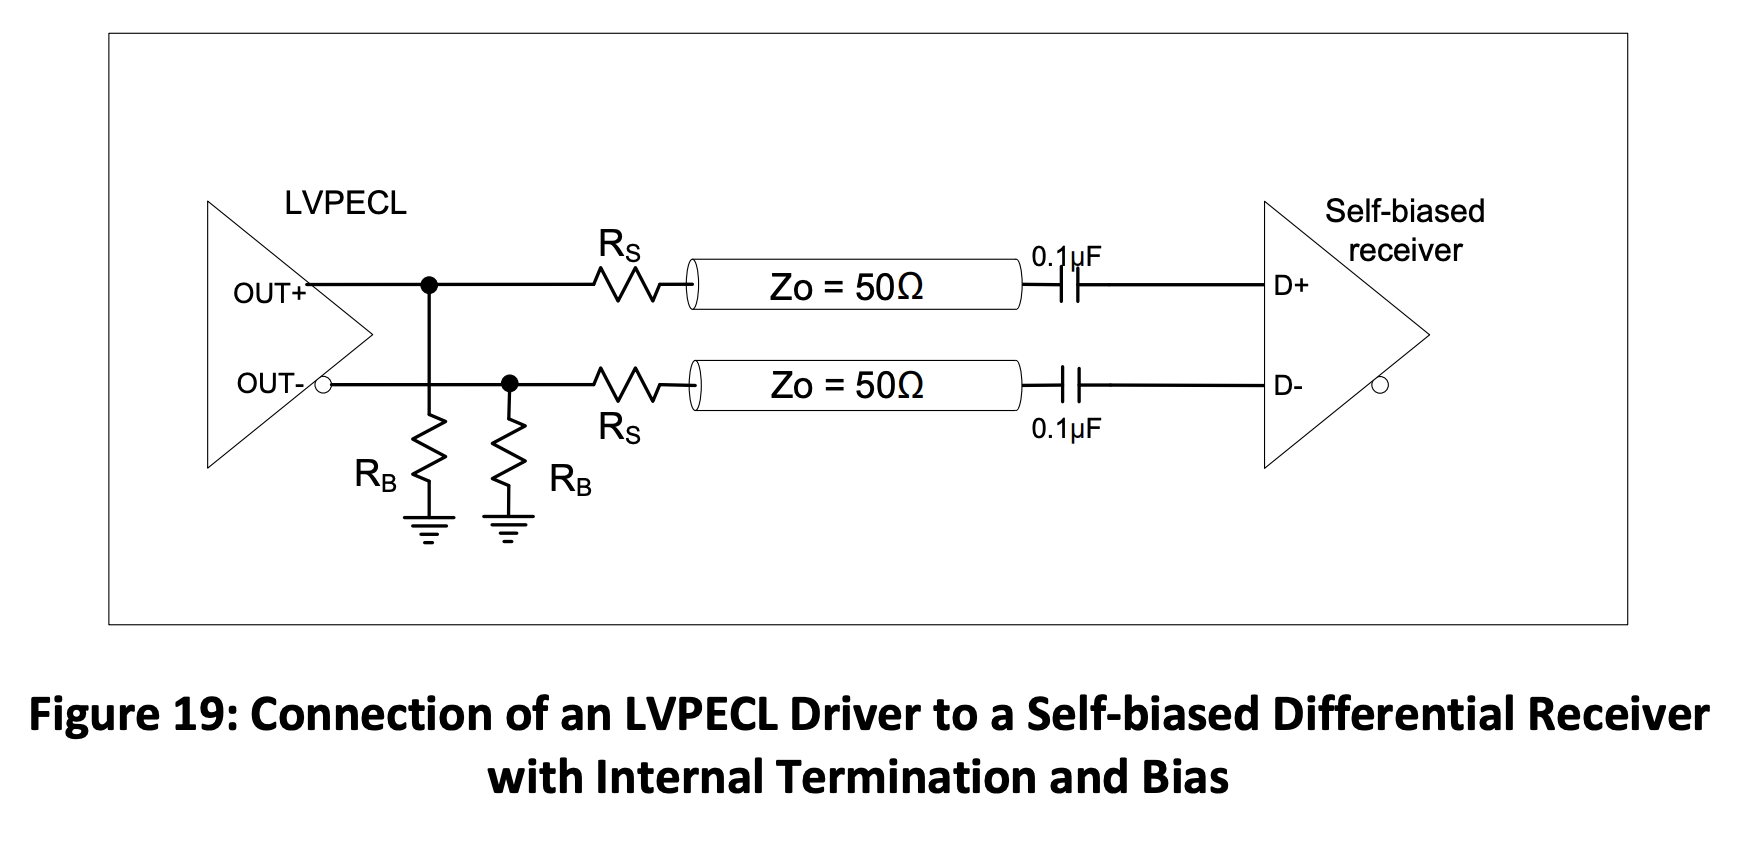 Figure 19 Connection of an LVPECL Driver to a Self-biased Differntial Receiver with Internal Termination and Bias